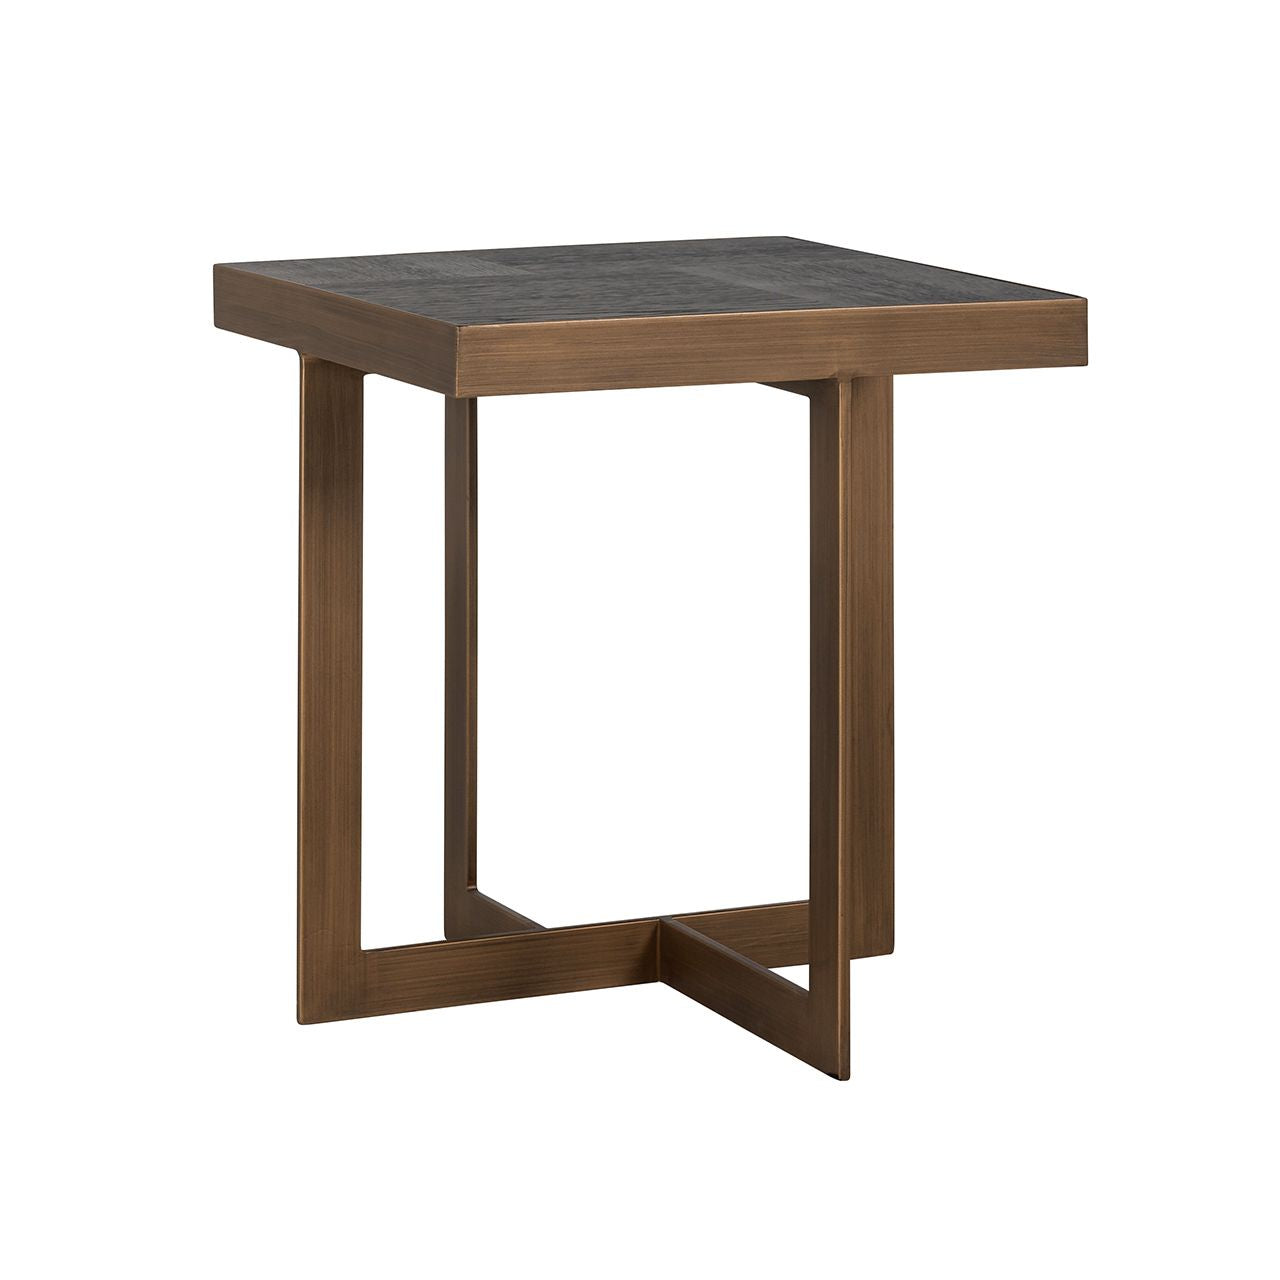 The Amberley Side Table